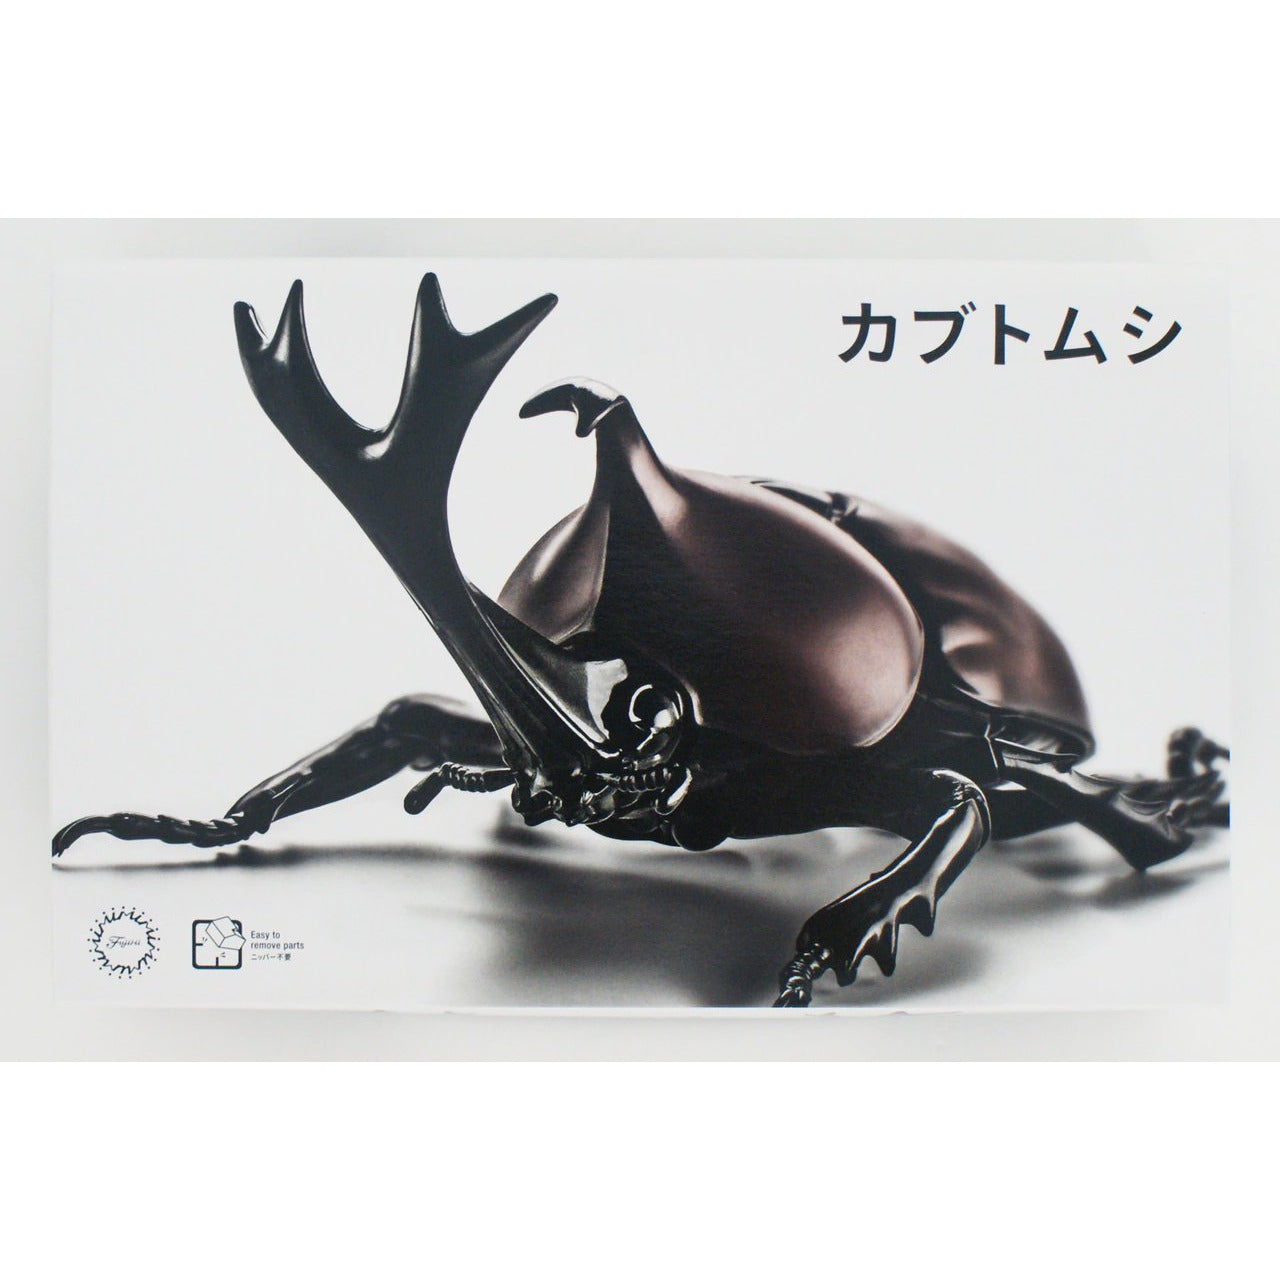 Japanese Rhinoceros Beetle Biology Edition Pre-painted Kit - The Living Thing Series by Fujimi